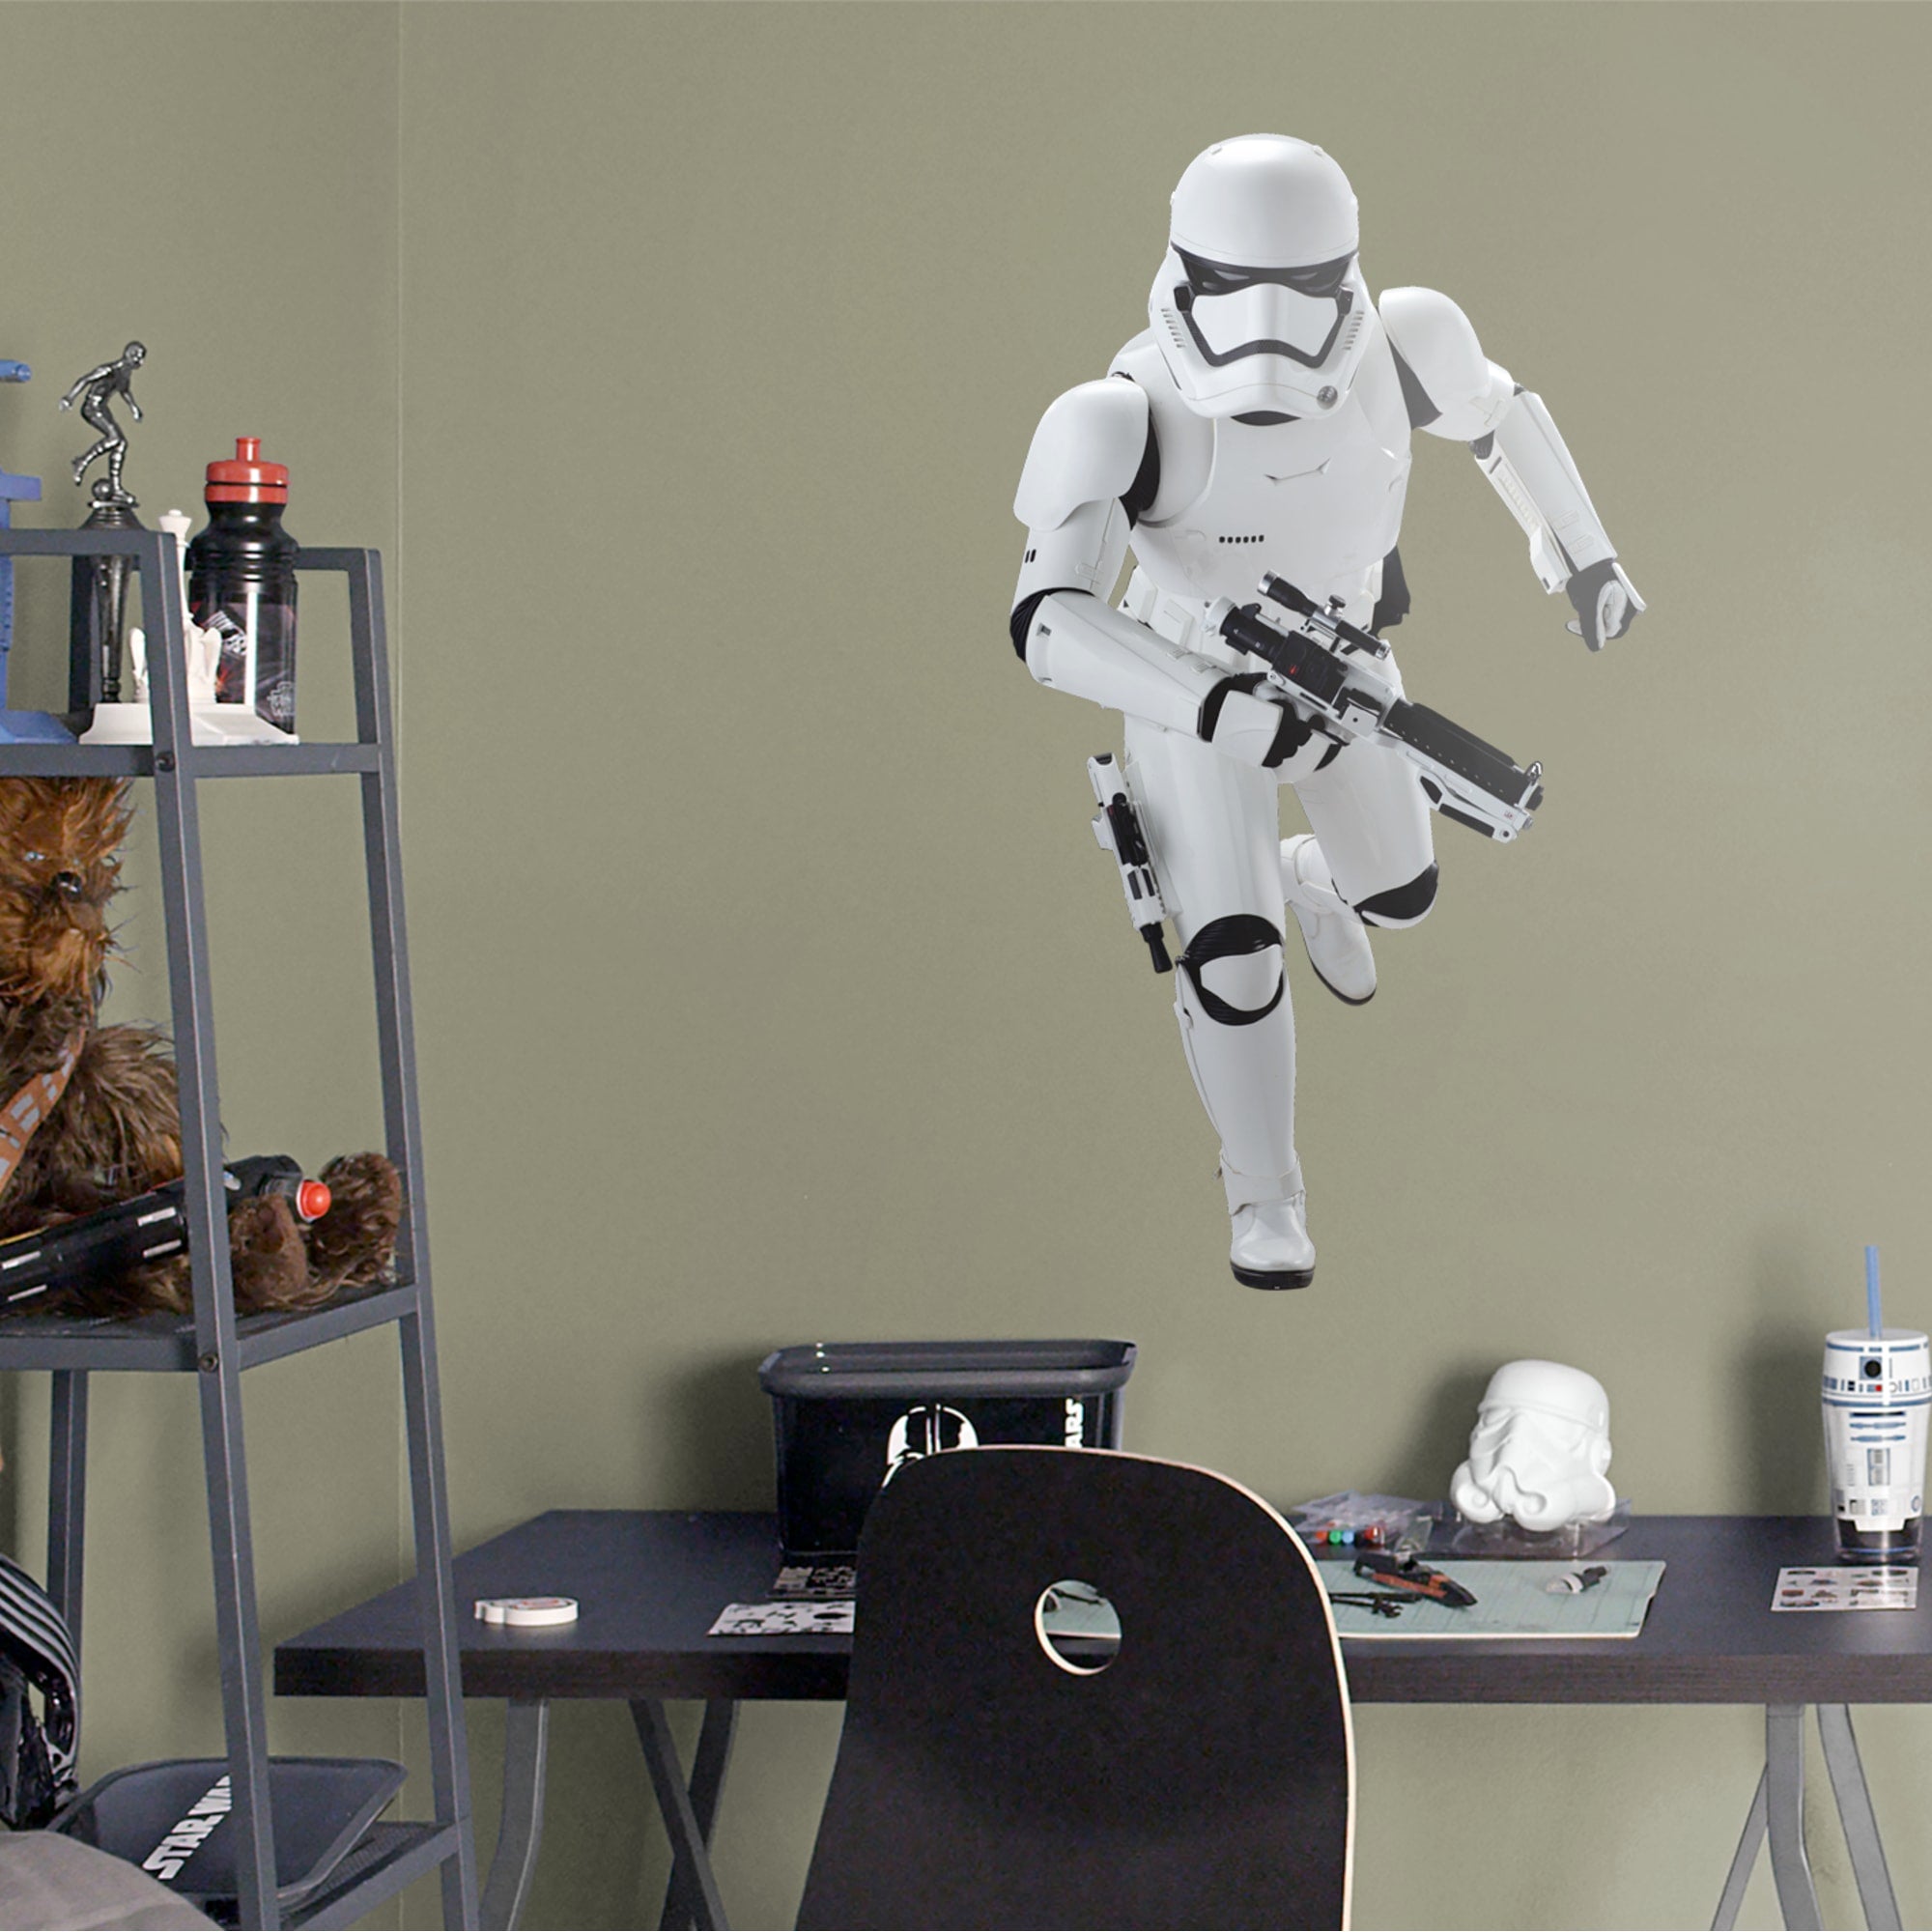 Stormtrooper - Star Wars: The Force Awakens - Officially Licensed Removable Wall Decal 21.0"W x 38.0"H by Fathead | Vinyl